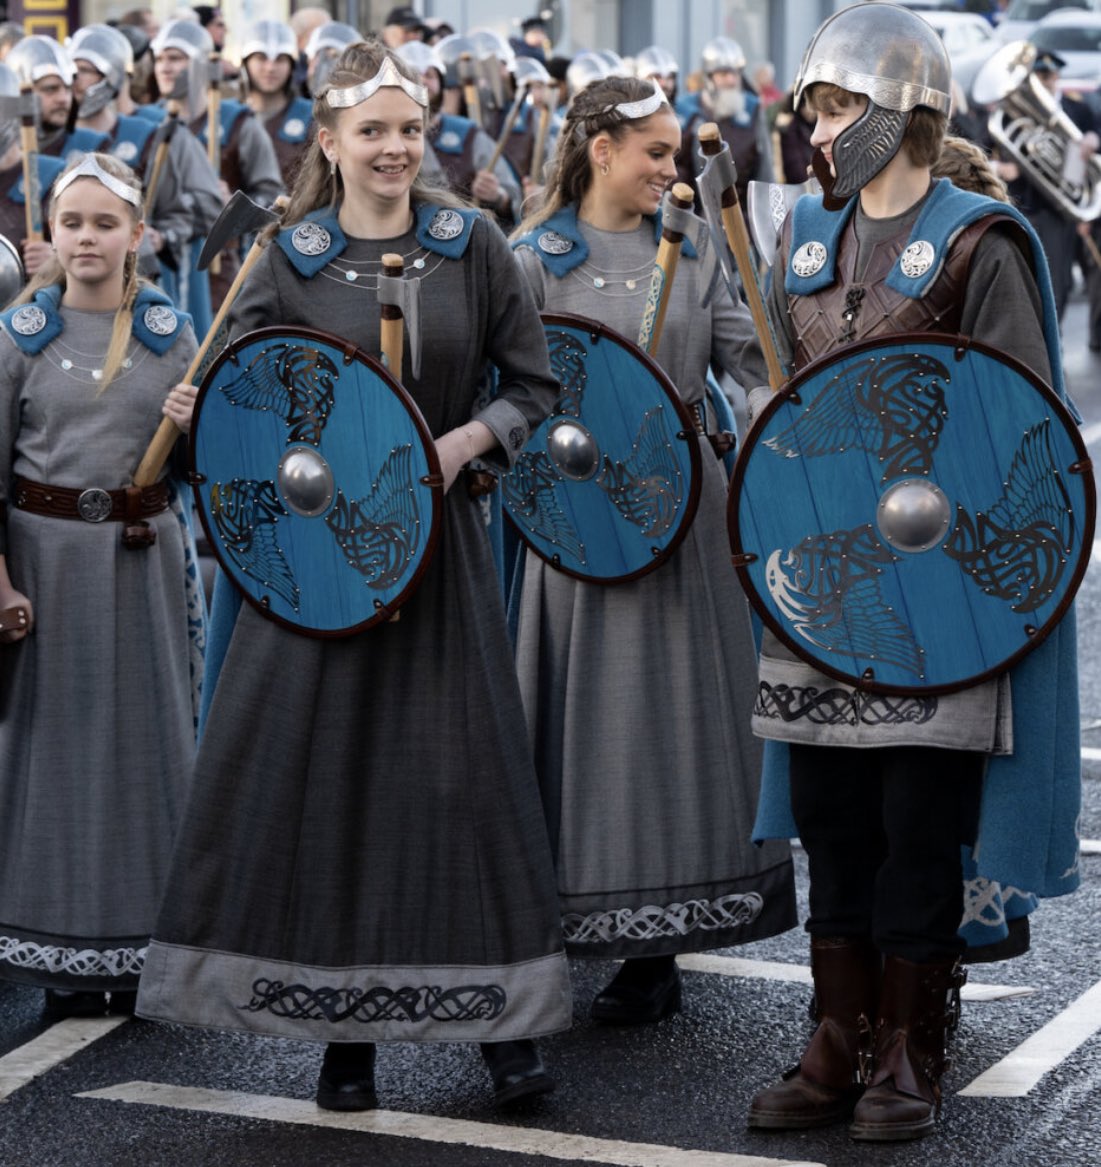 You may have heard of Up Helly Aa, Shetland’s viking fire festival. What you might not know is that for decades, people have campaigned to allow women and girls to be participate in the main festival. This year, for the first time, women and girls participated. Just wonderful.